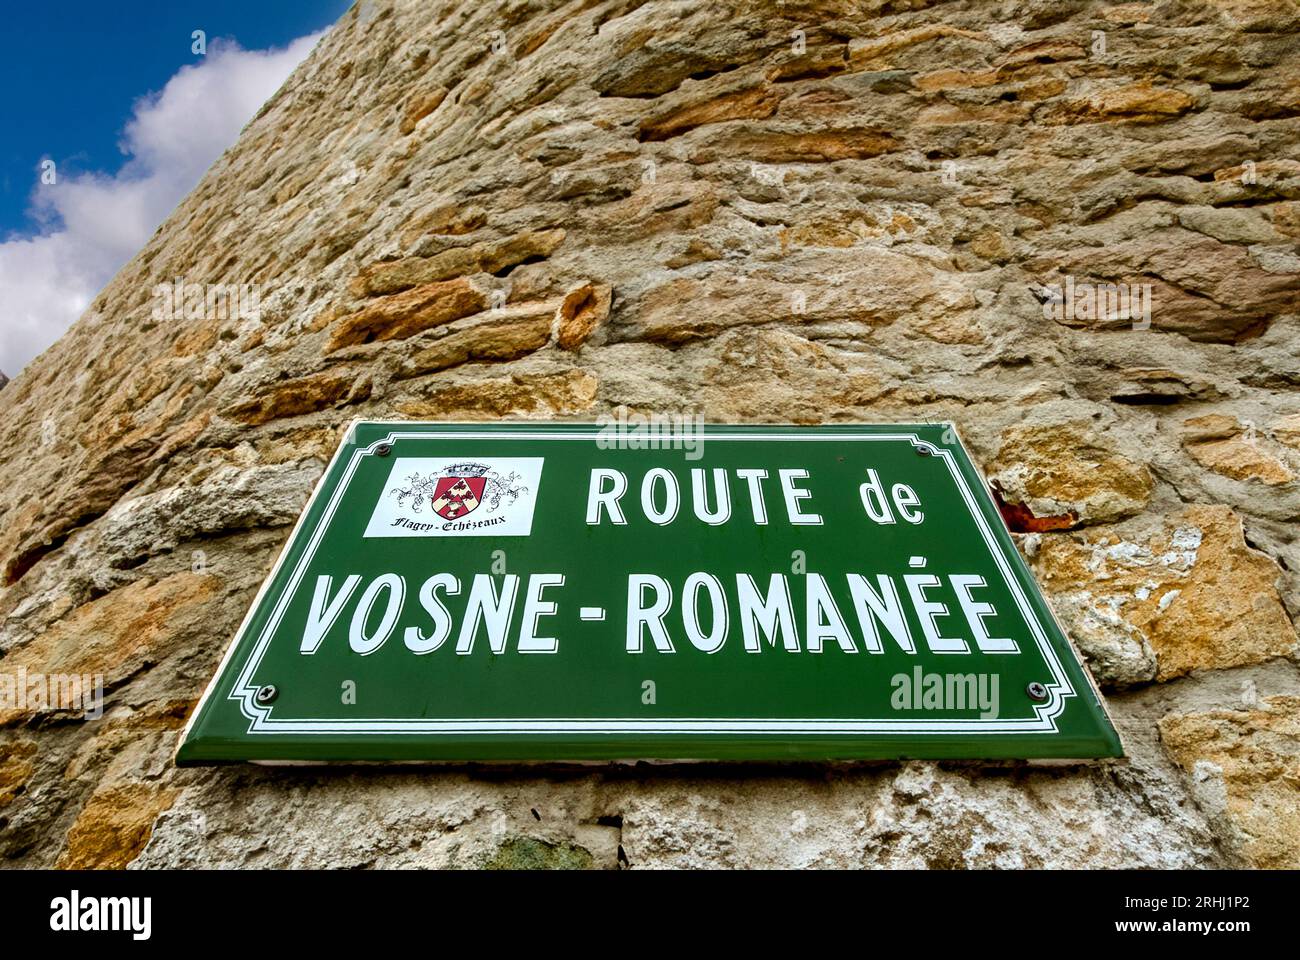 VOSNE-ROMANÉE Road sign on old rustic winery wall Route de Vosne-Romanee a luxury red burgundy wine Route des Grands Crus Burgundy France Stock Photo